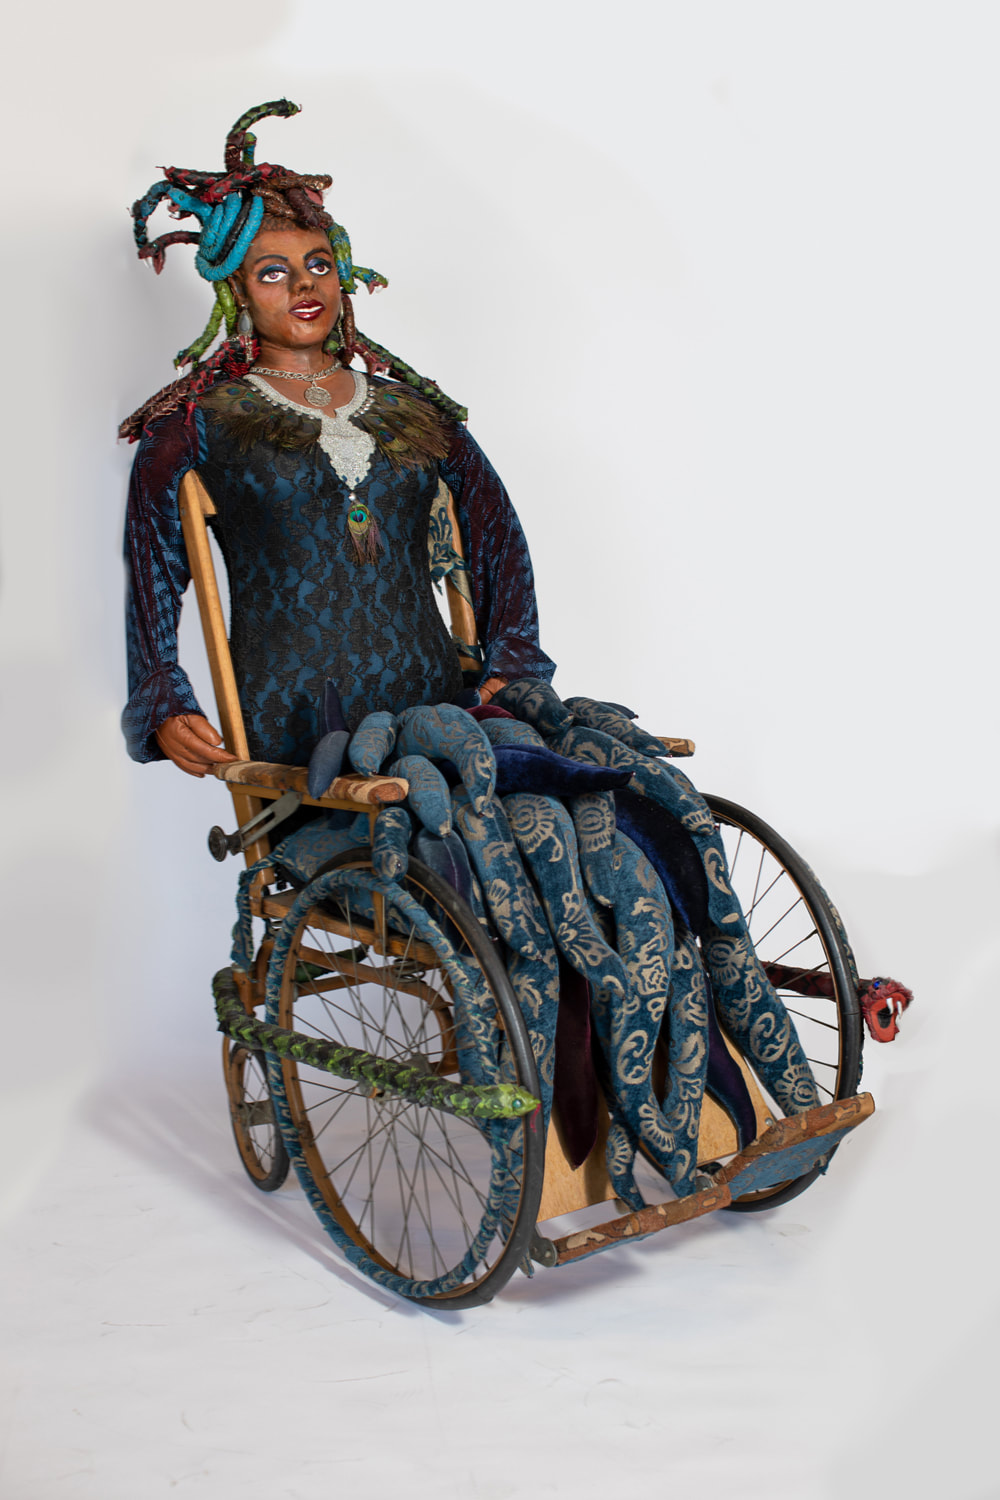 A sculpted female figure with snakes for hair built into a vintage wheelchair